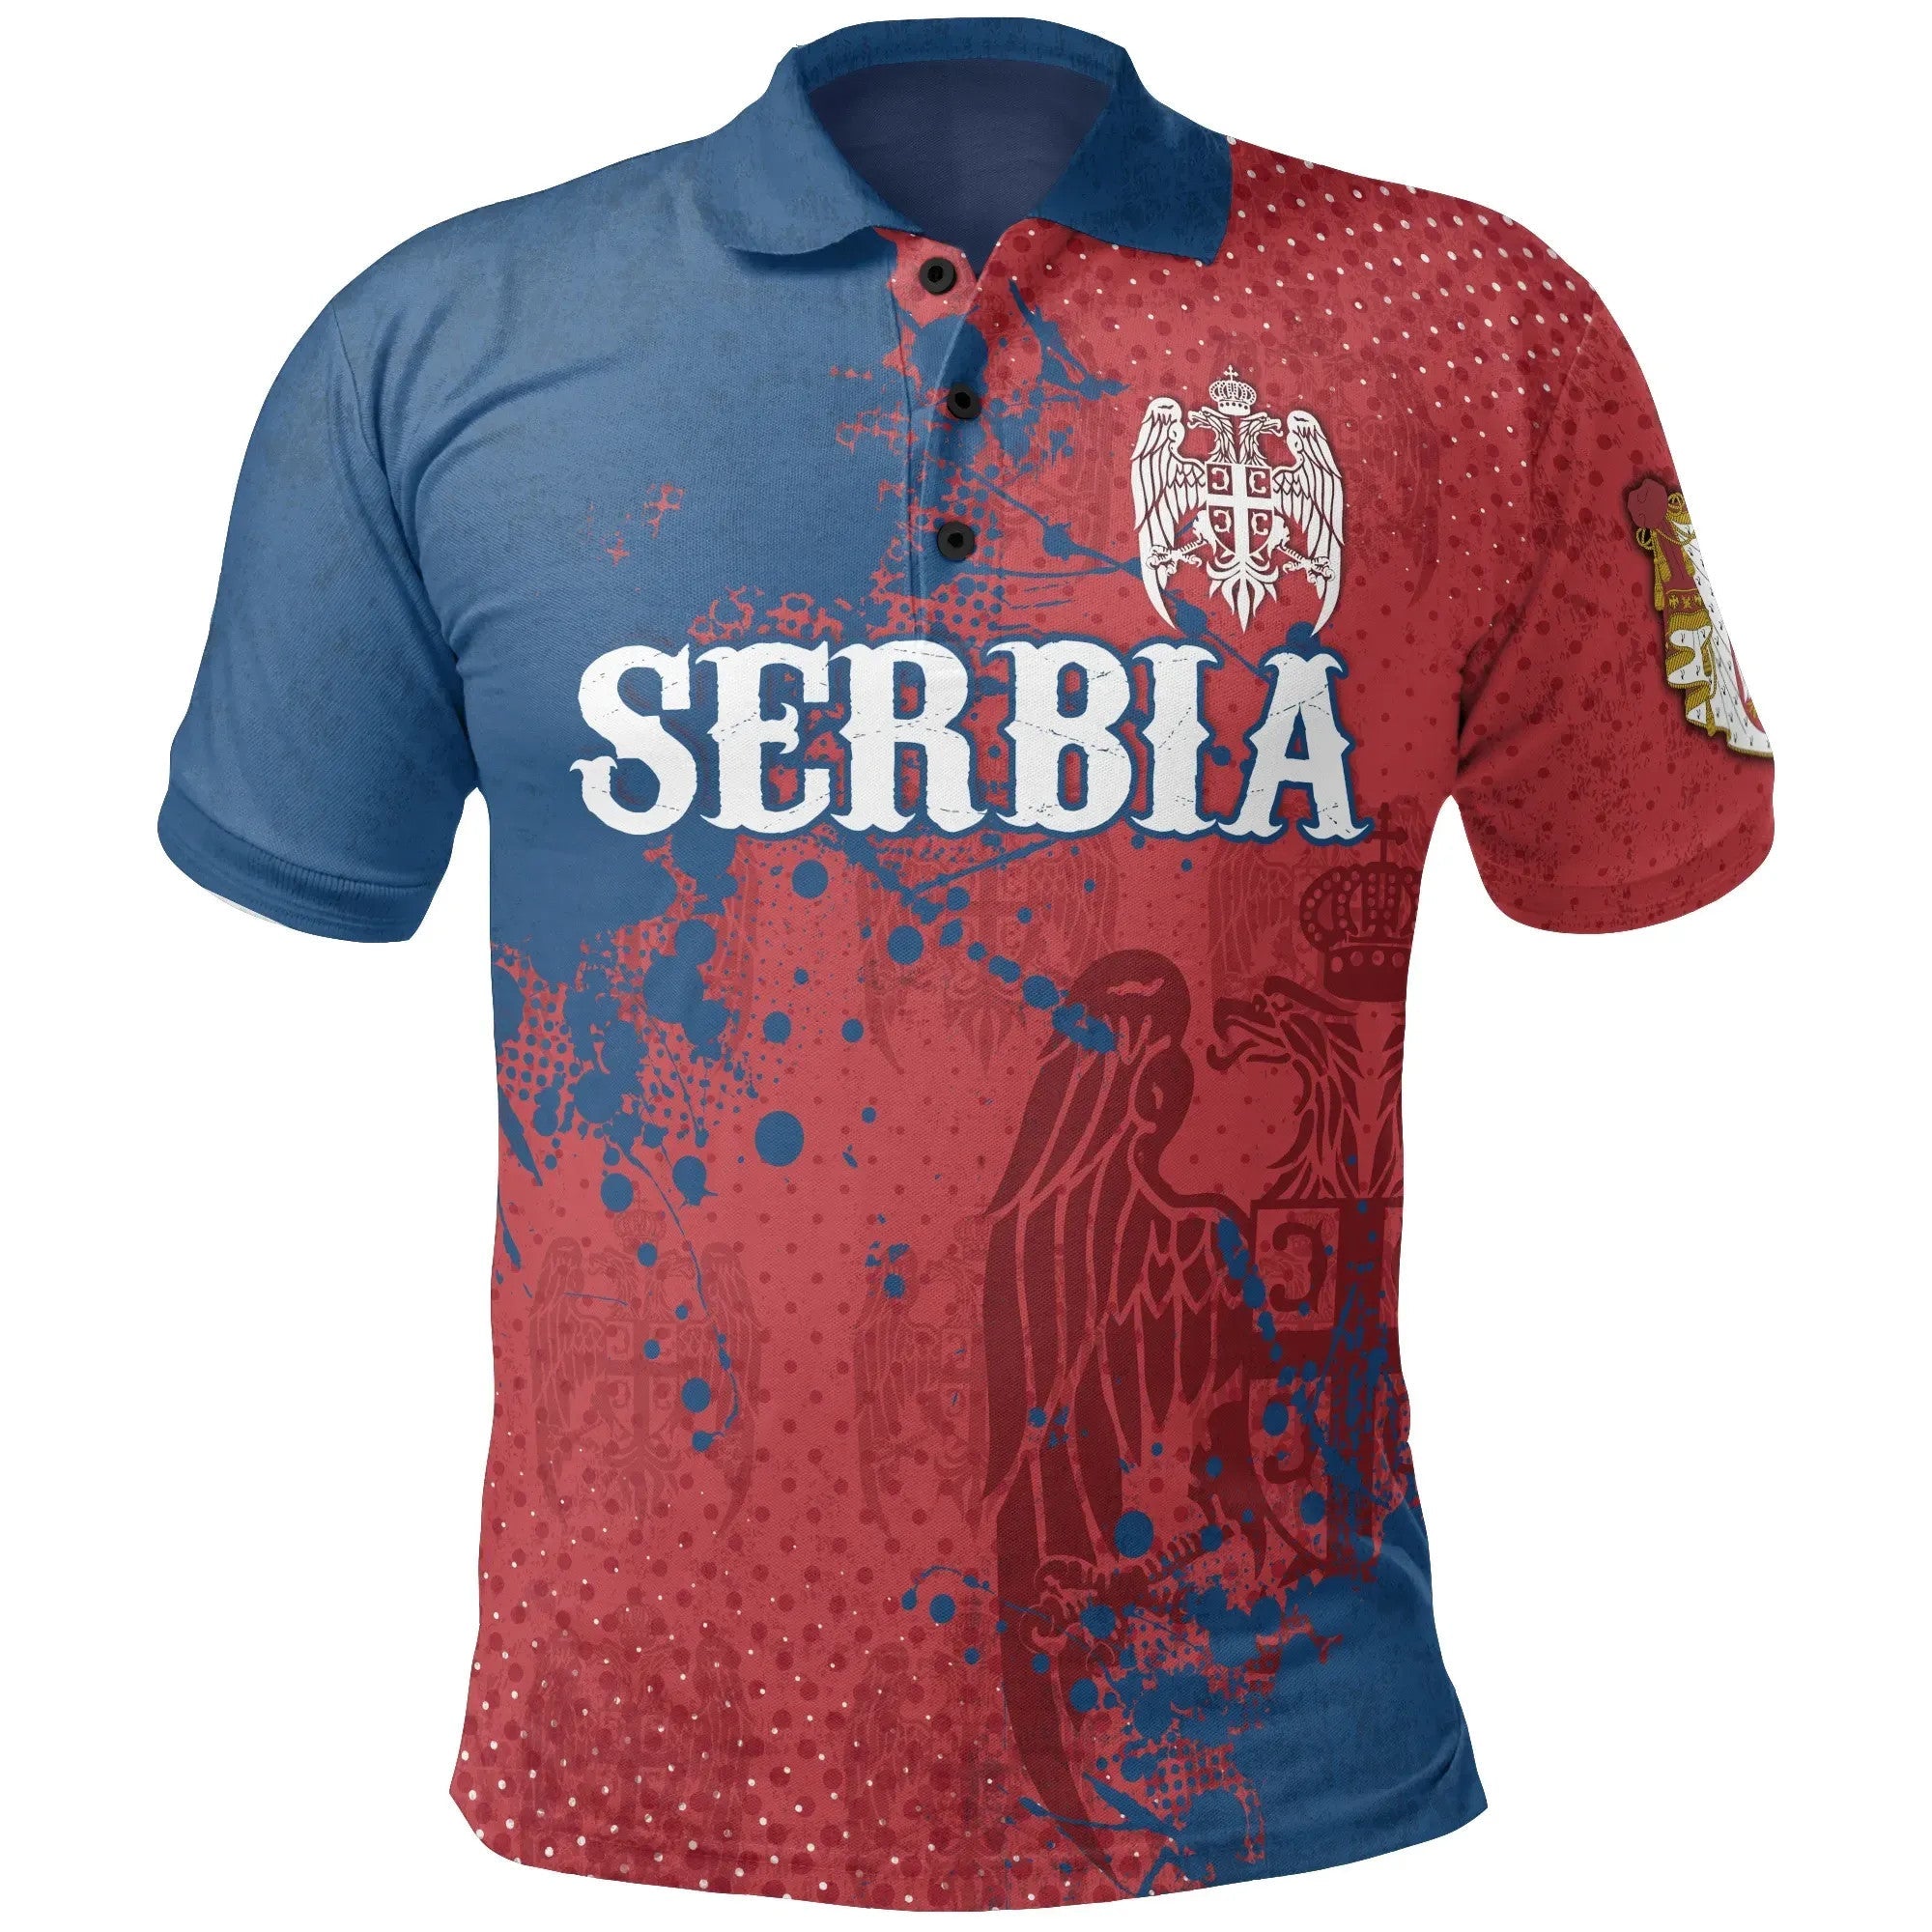 serbia-polo-shirt-the-great-serbia